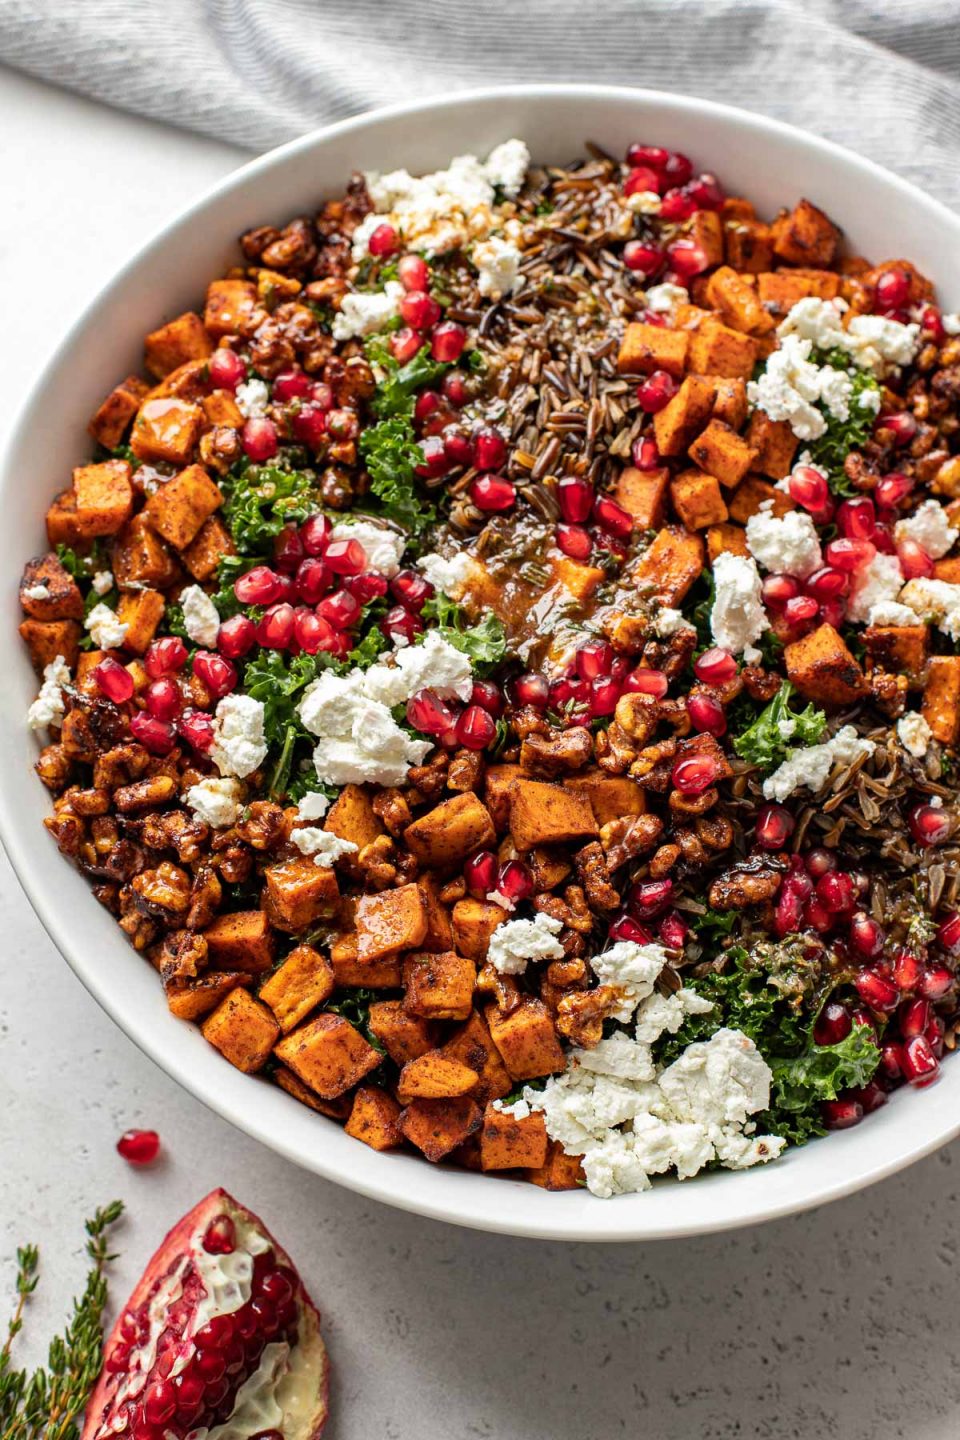 Thanksgiving salad in a large white serving bowl sits atop a white textured surface. A blue and white striped linen napkin, a few sprigs of fresh thyme, and pieces of pomegranate with loose pomegranate arils rests alongside the serving bowl.